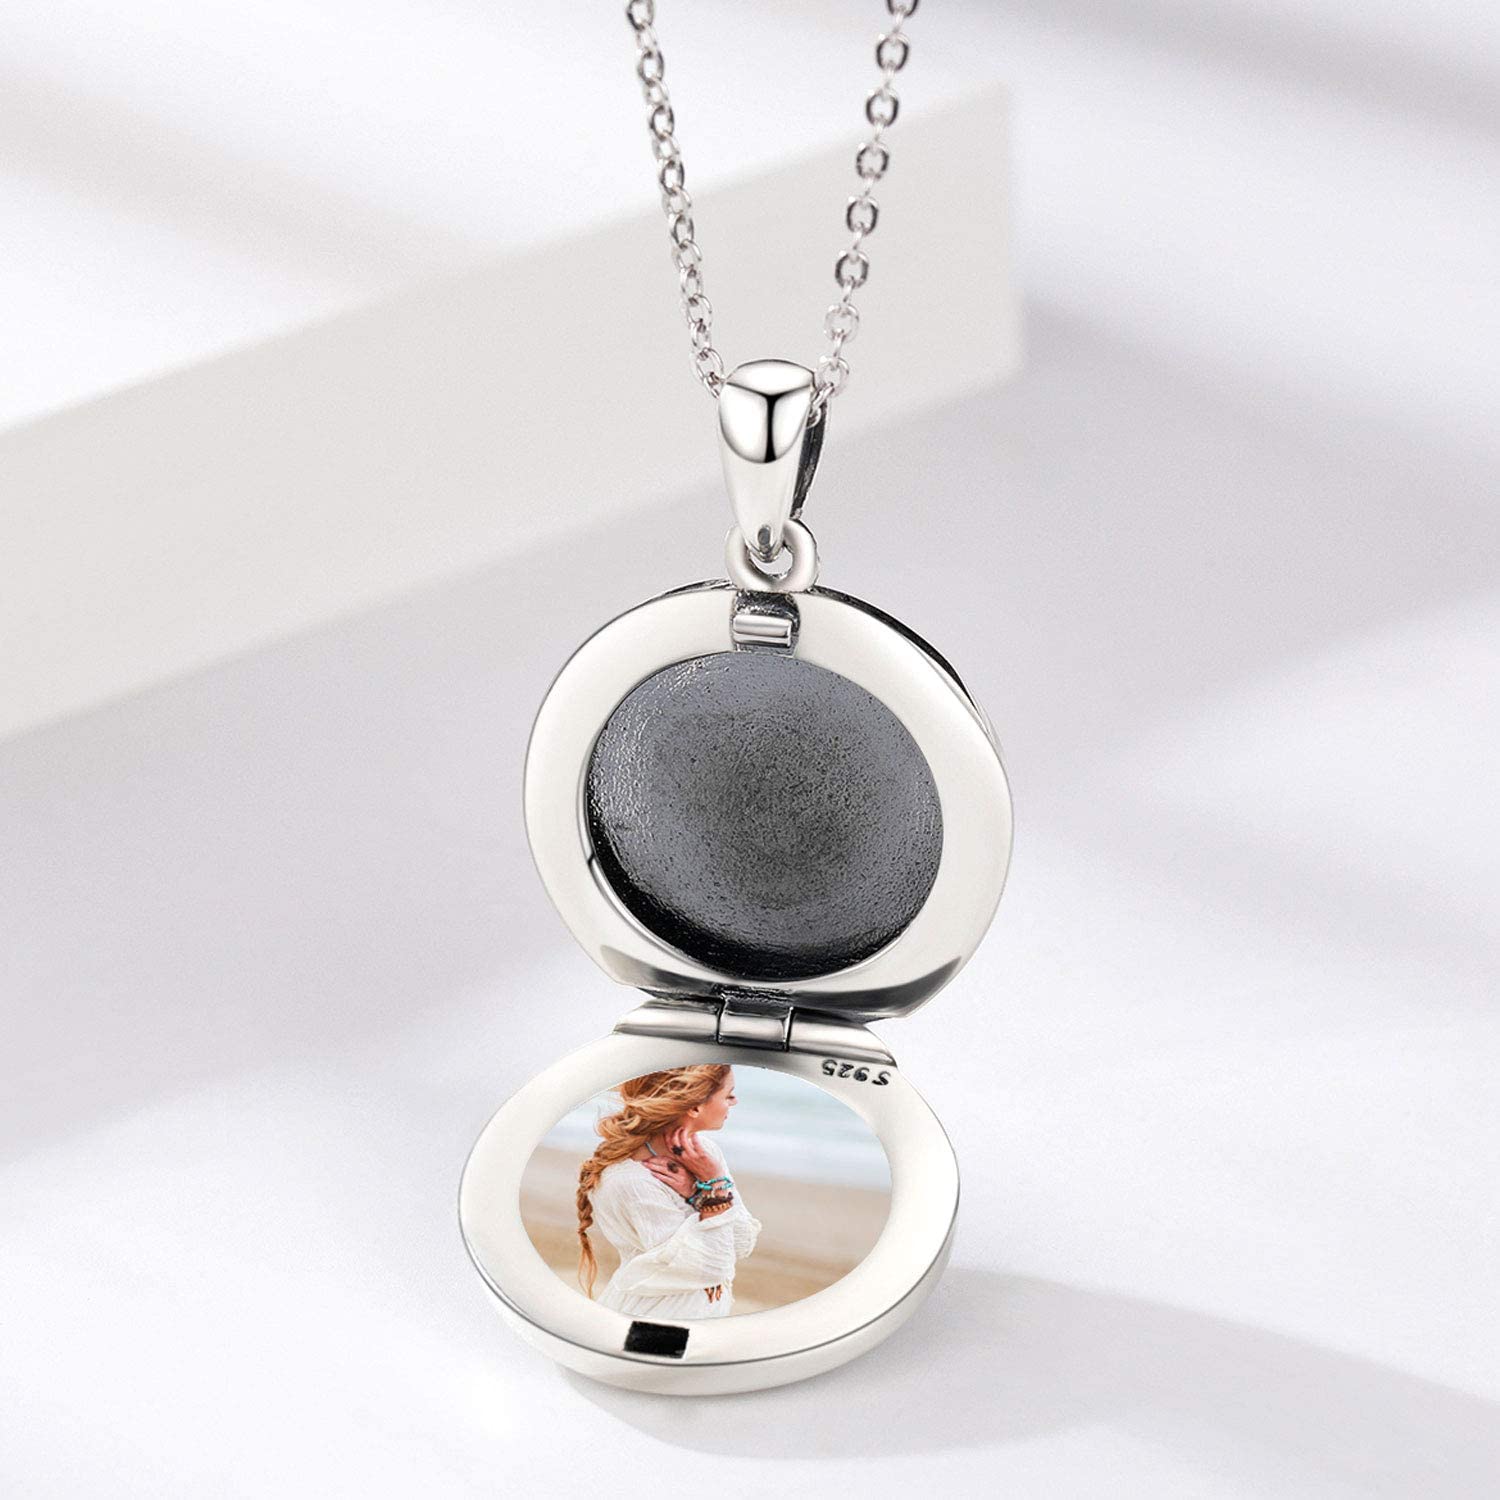 Silver locket necklace with a photo of a woman wearing a white dress